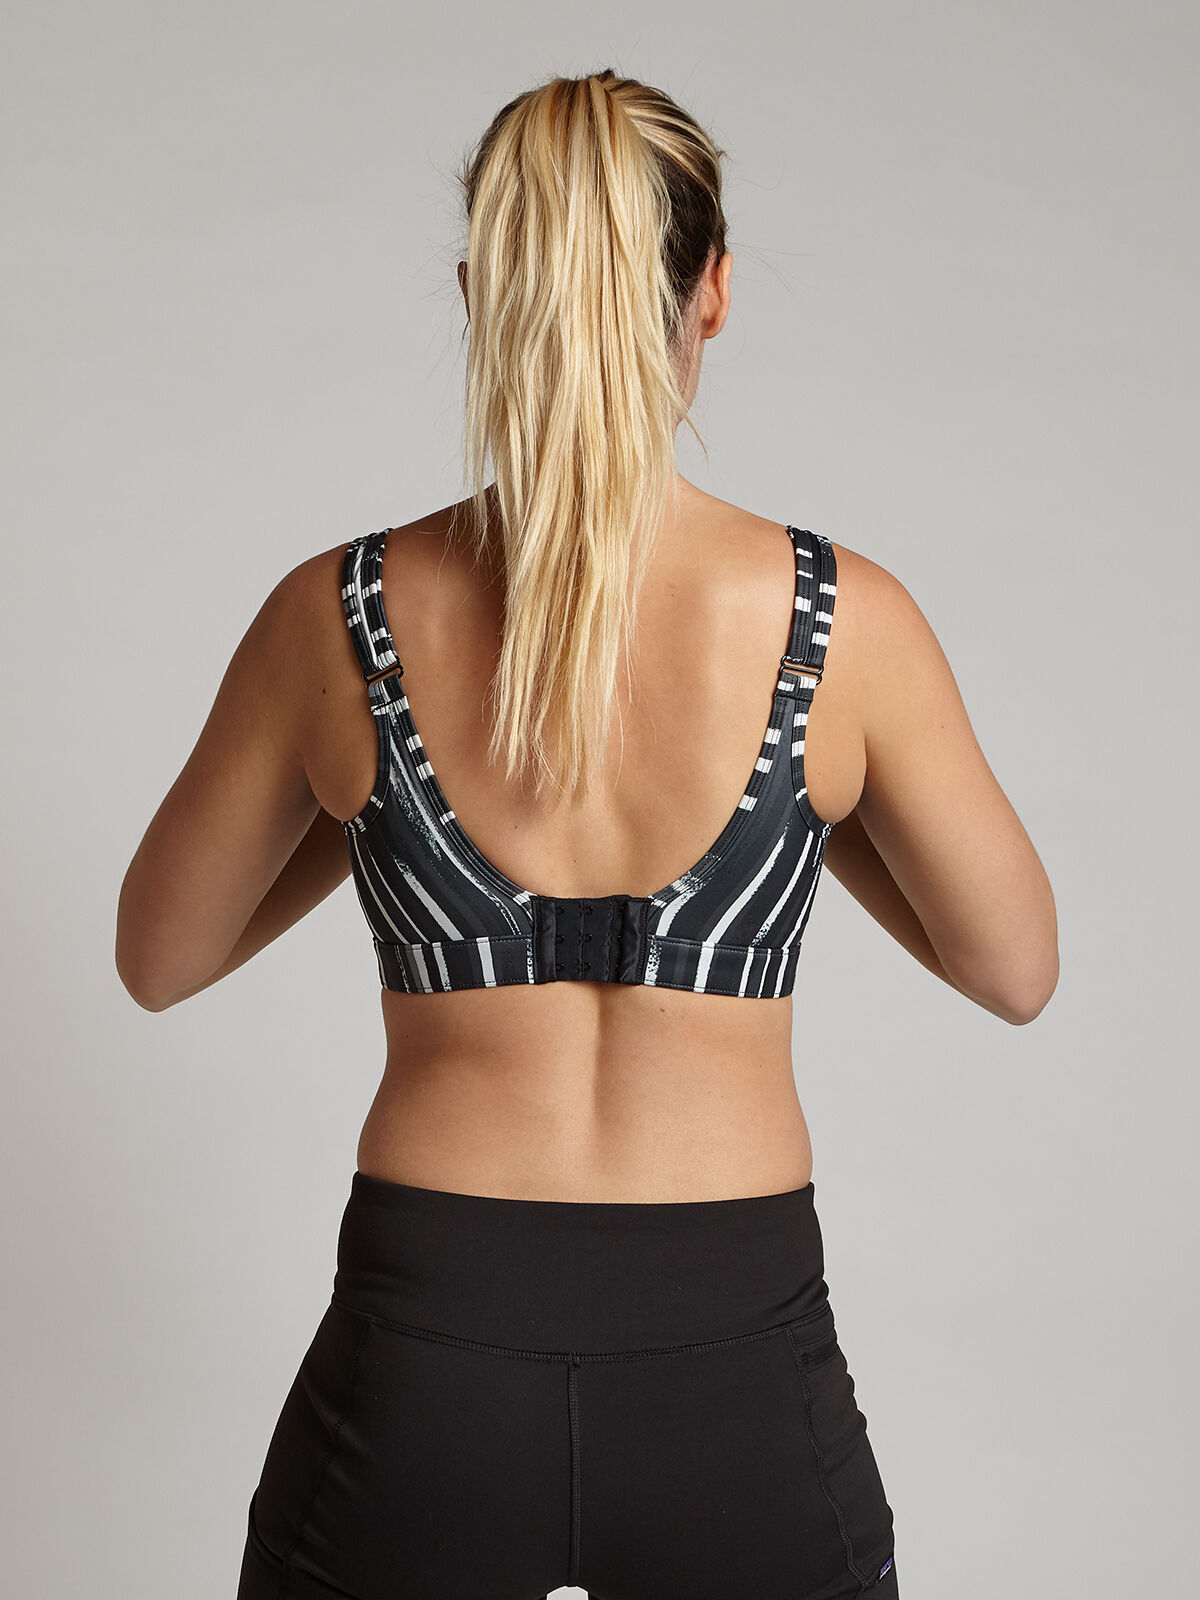 solid tech athena sports bra by moving comfort for title nine